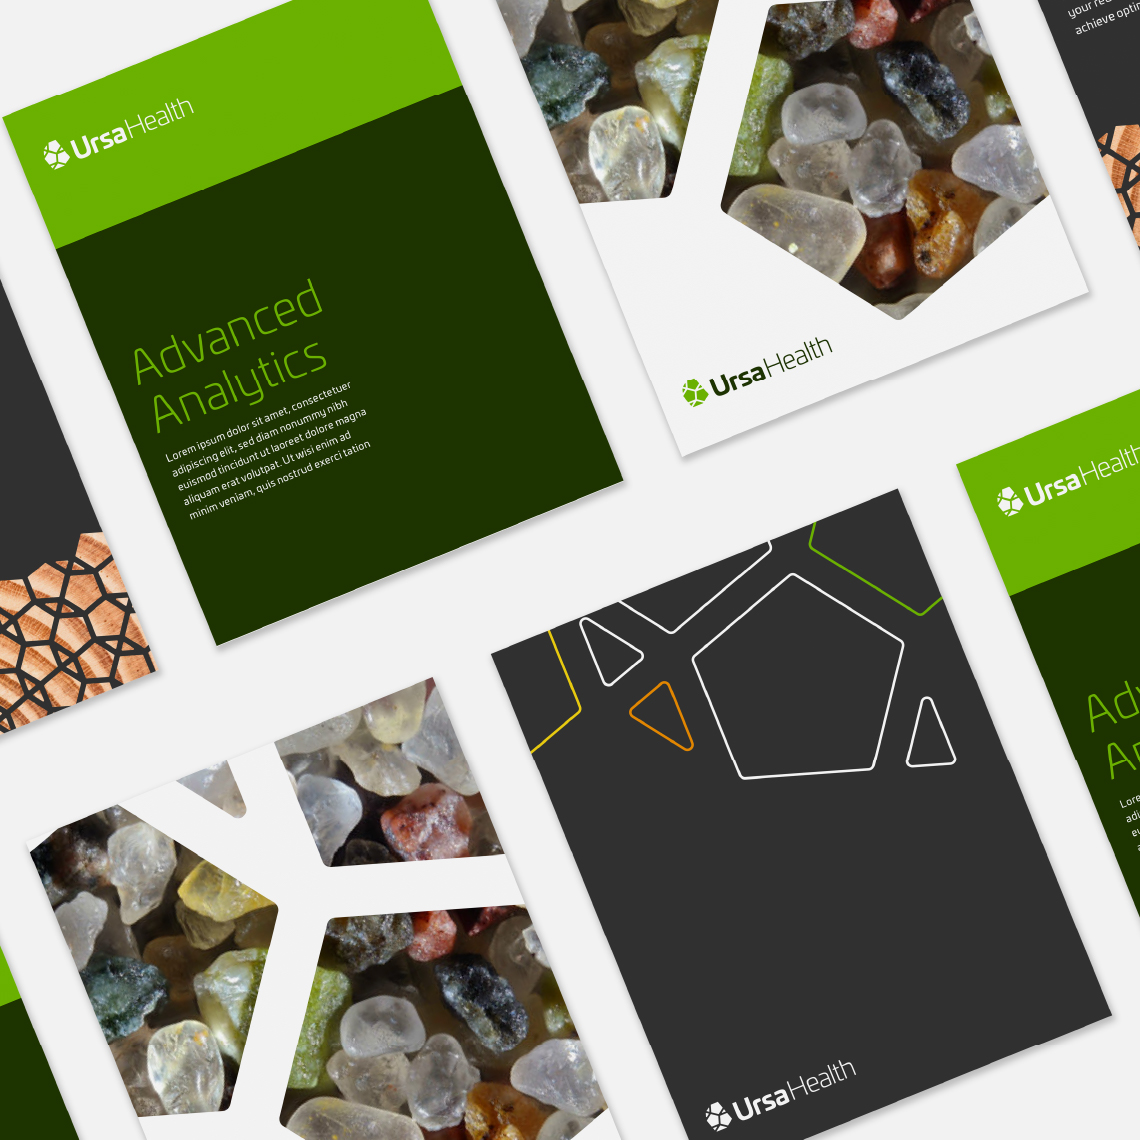 Examples of the design system applied to printed material